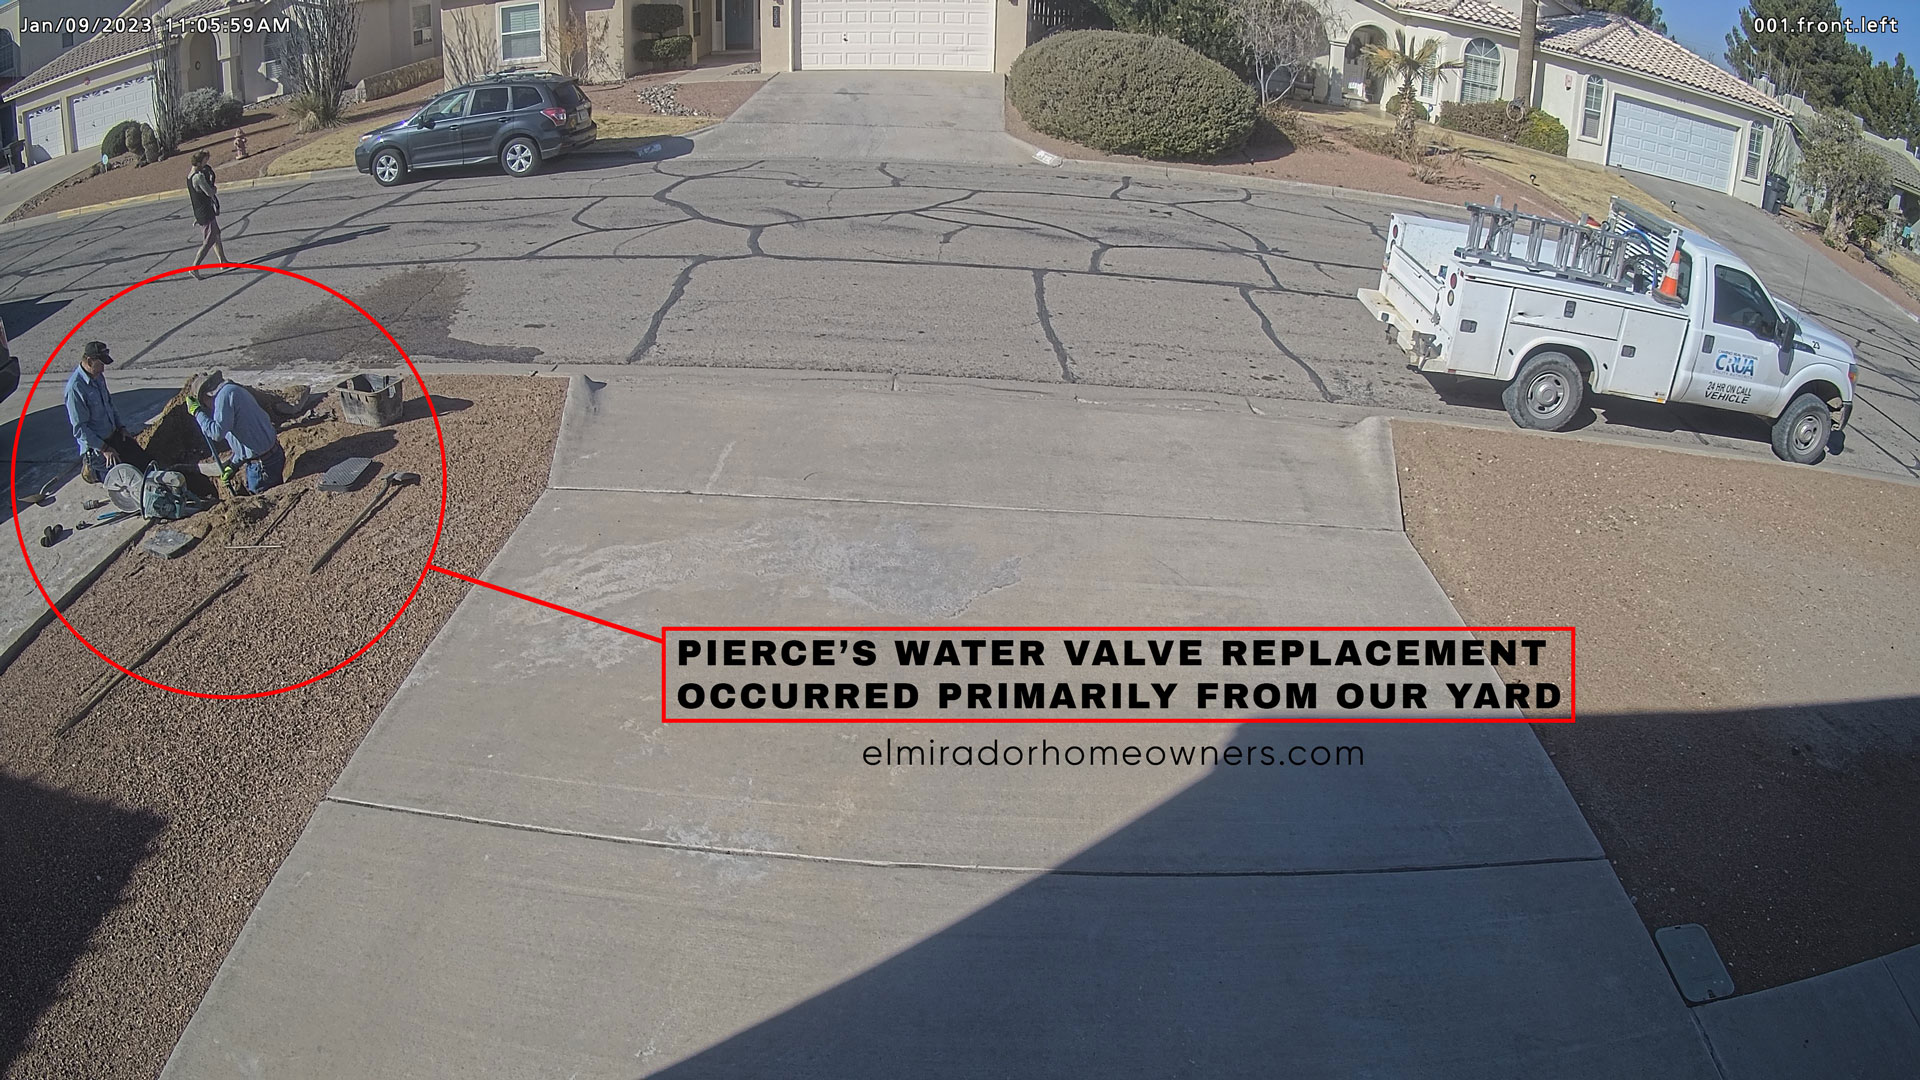 Pierce's Water Valve Replacement Occurs from Our Yard